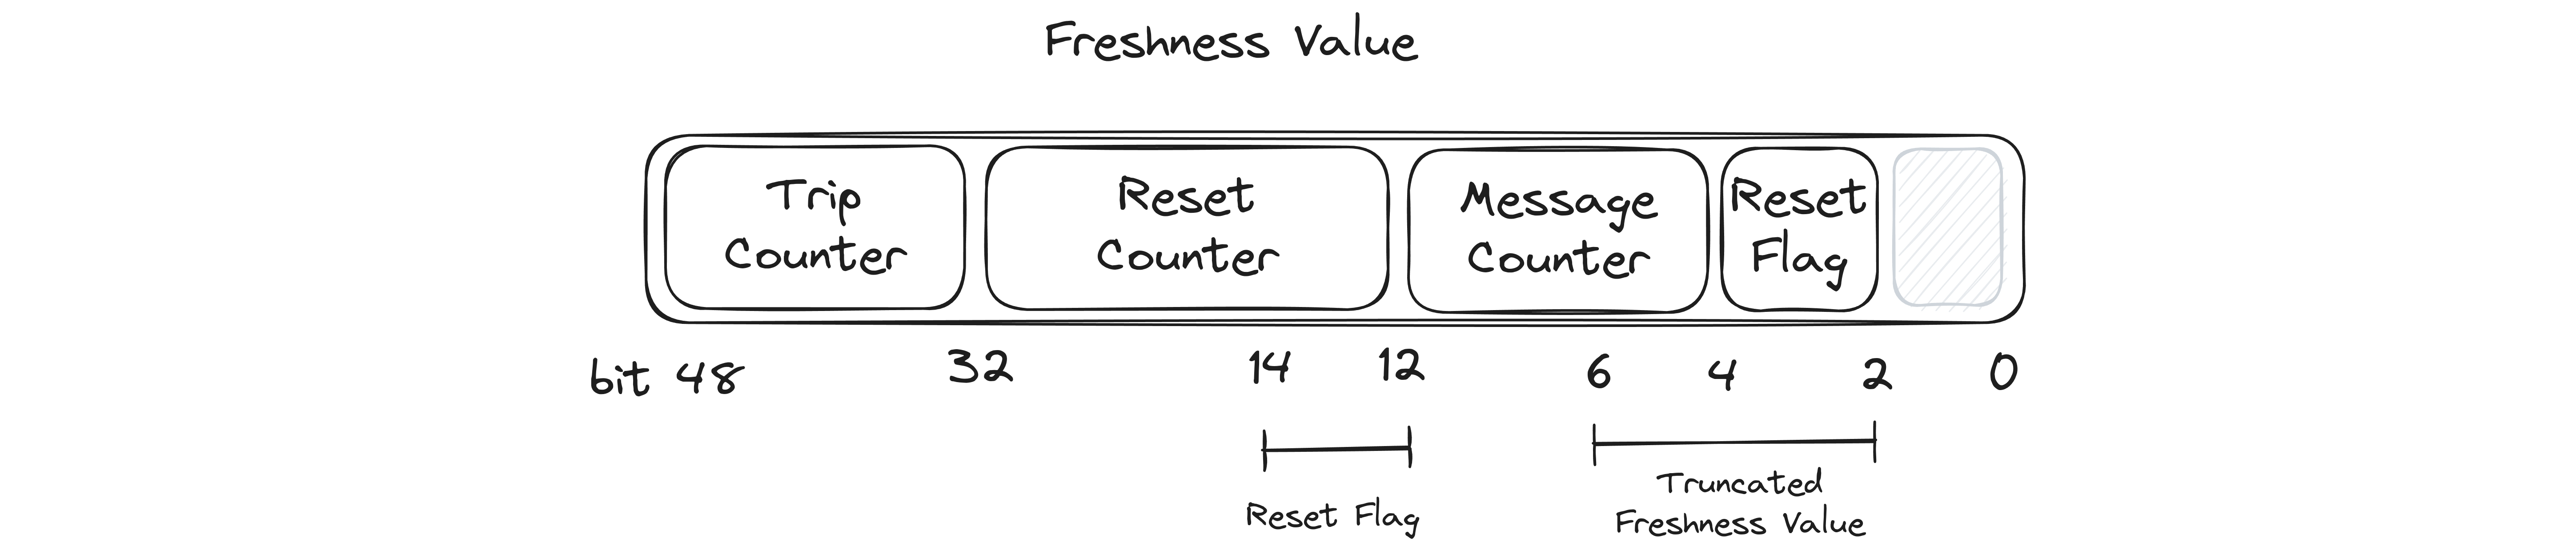 Contents of the Freshness Value